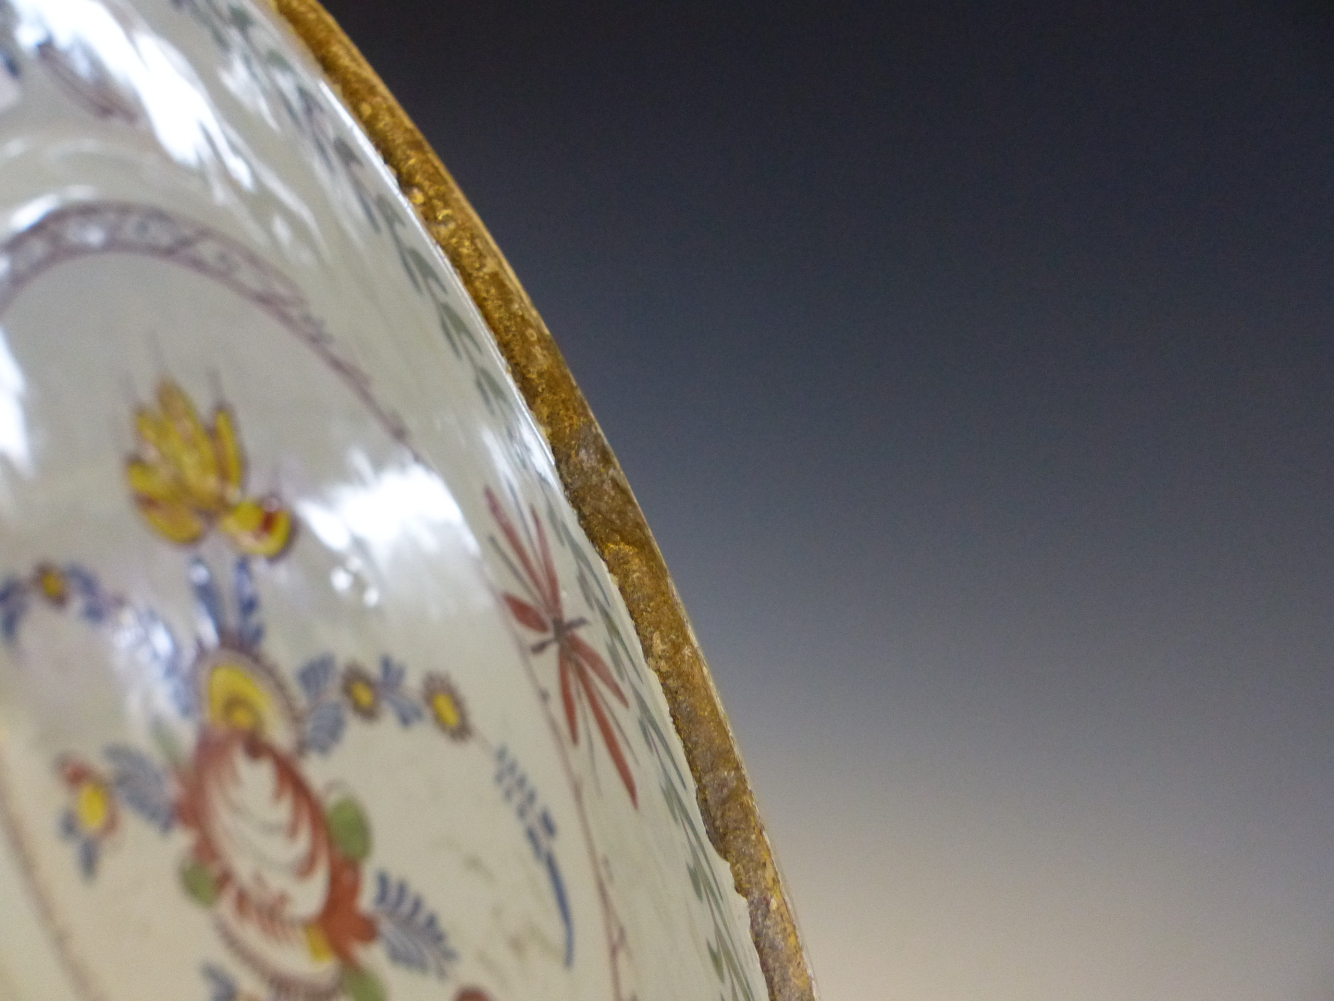 A PAIR OF MID 18th C. ENGLISH POLYCHROME DELFT DISHES PAINTED WITH CENTRAL SPRAYS OF FLOWERS - Image 5 of 20